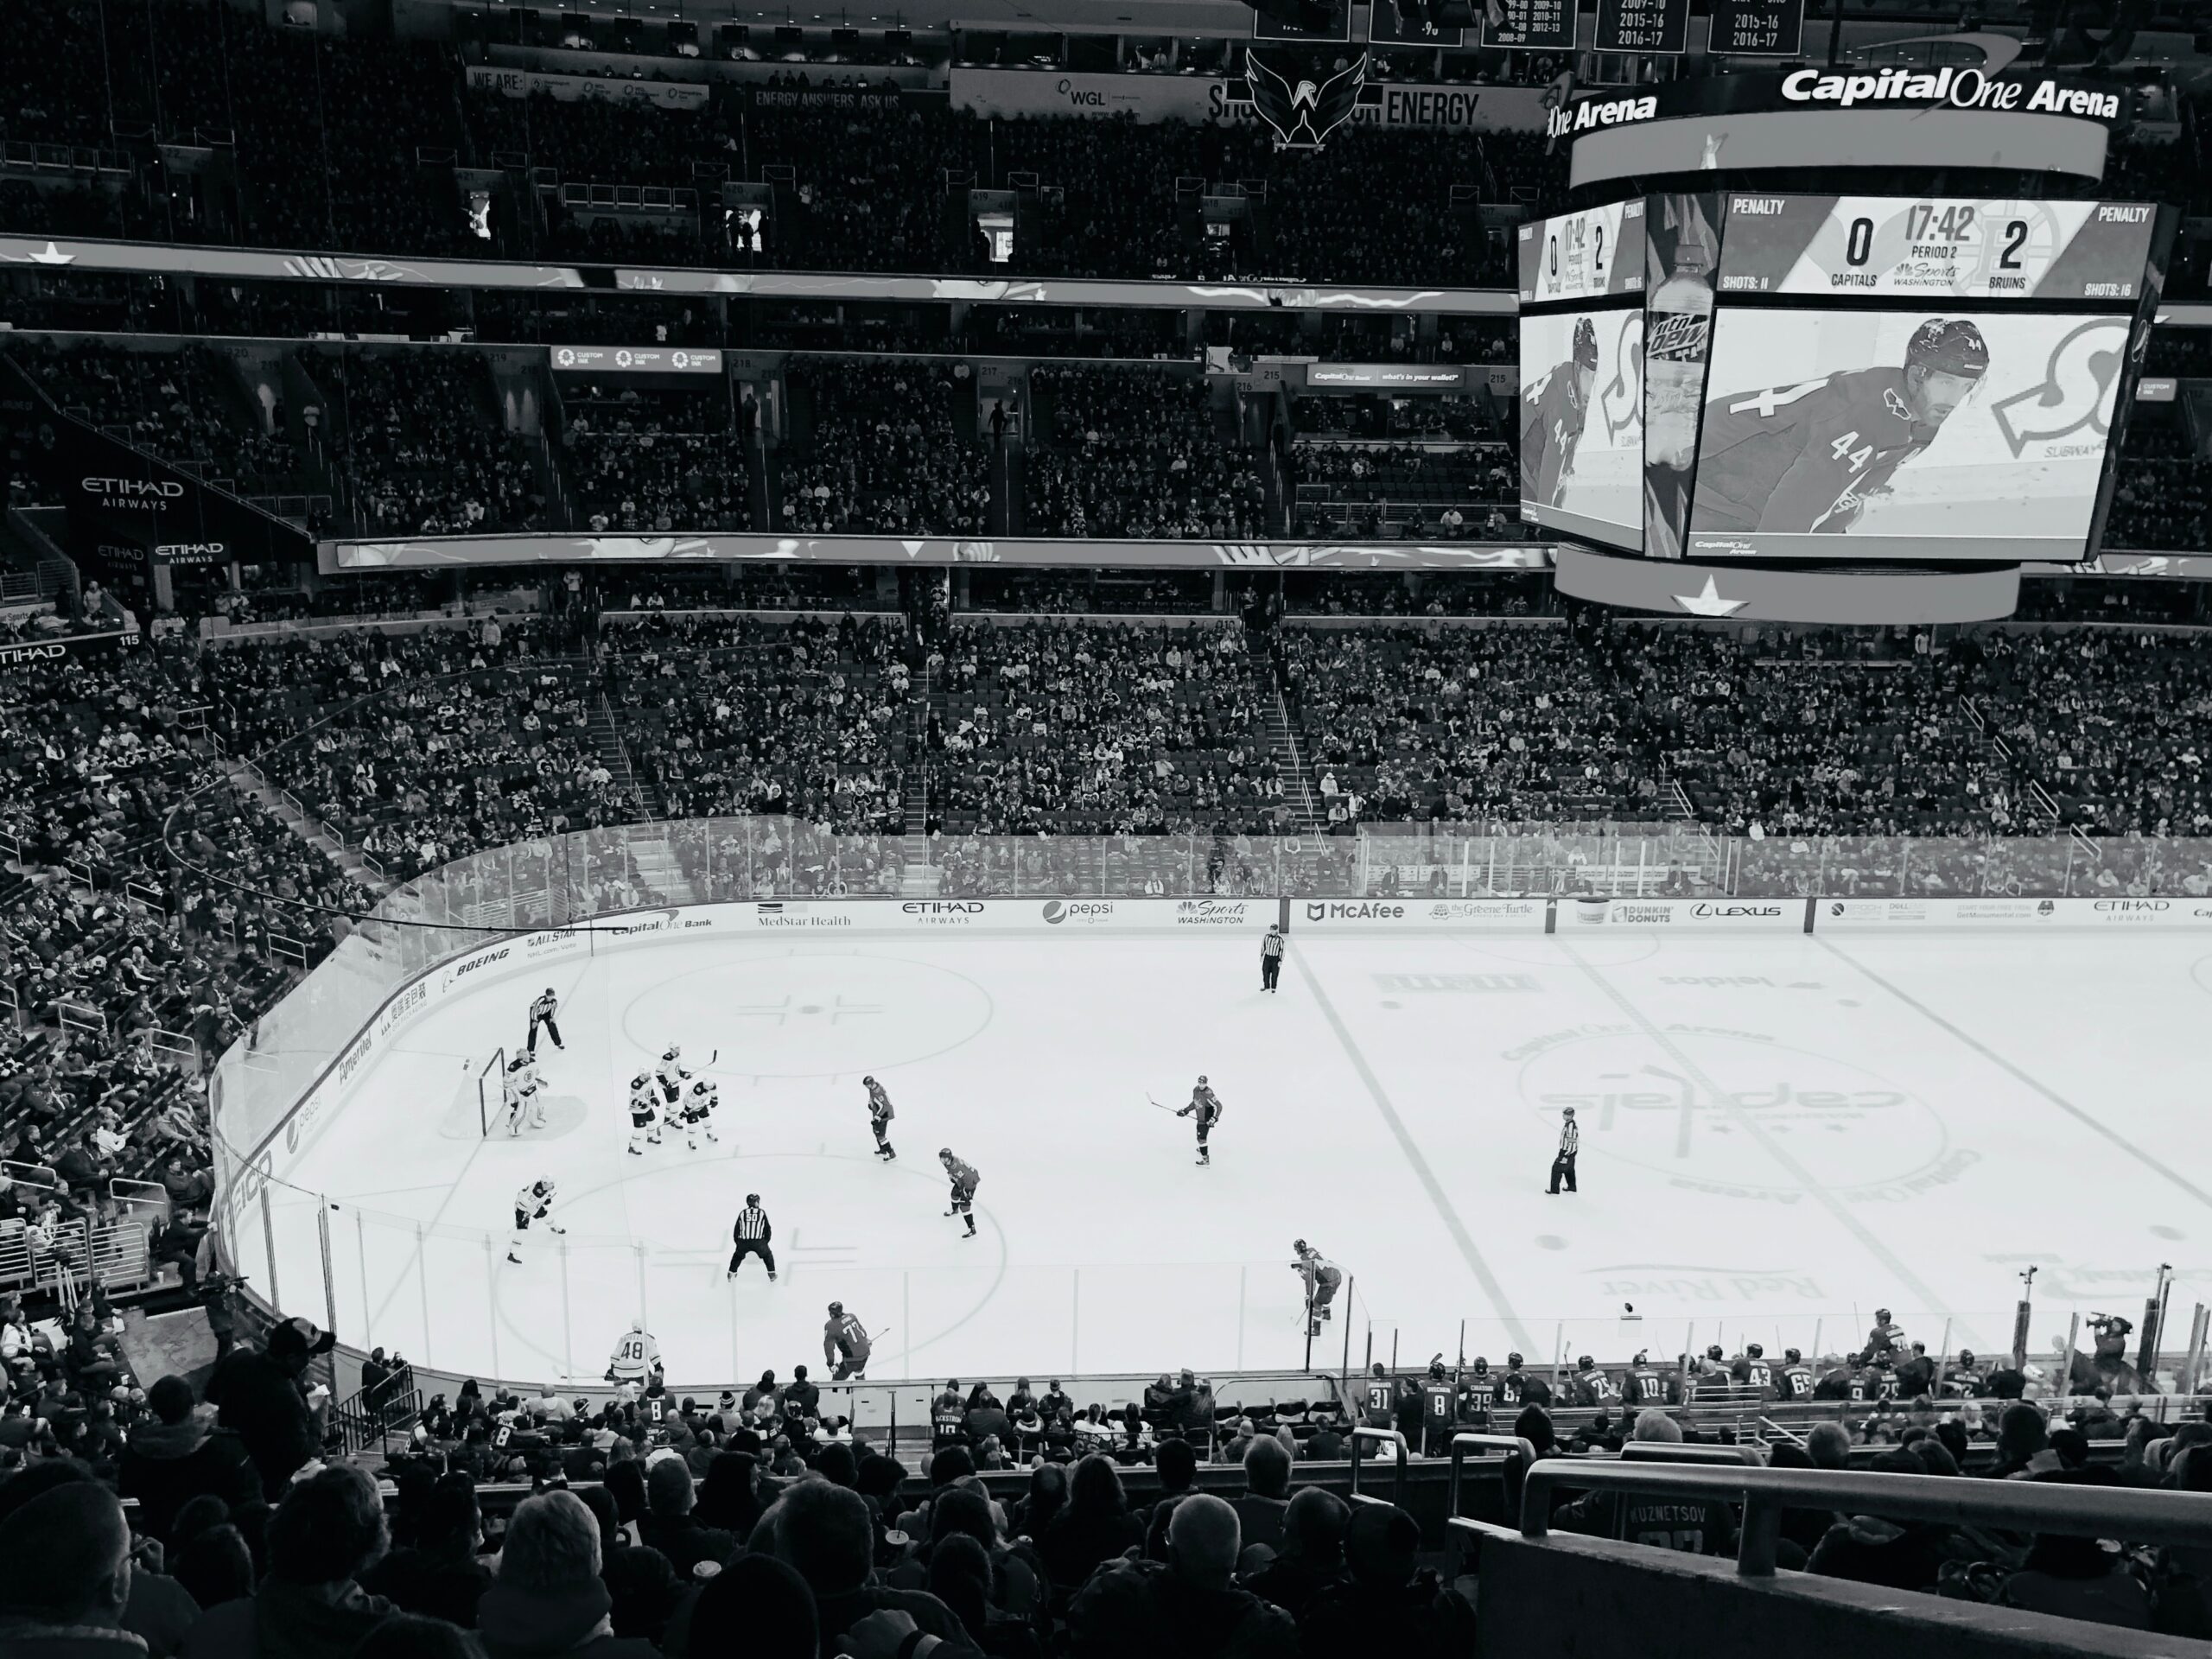 HD-grey-wallpapers-hockey-sports-images-Capital-One-Arena-United-States